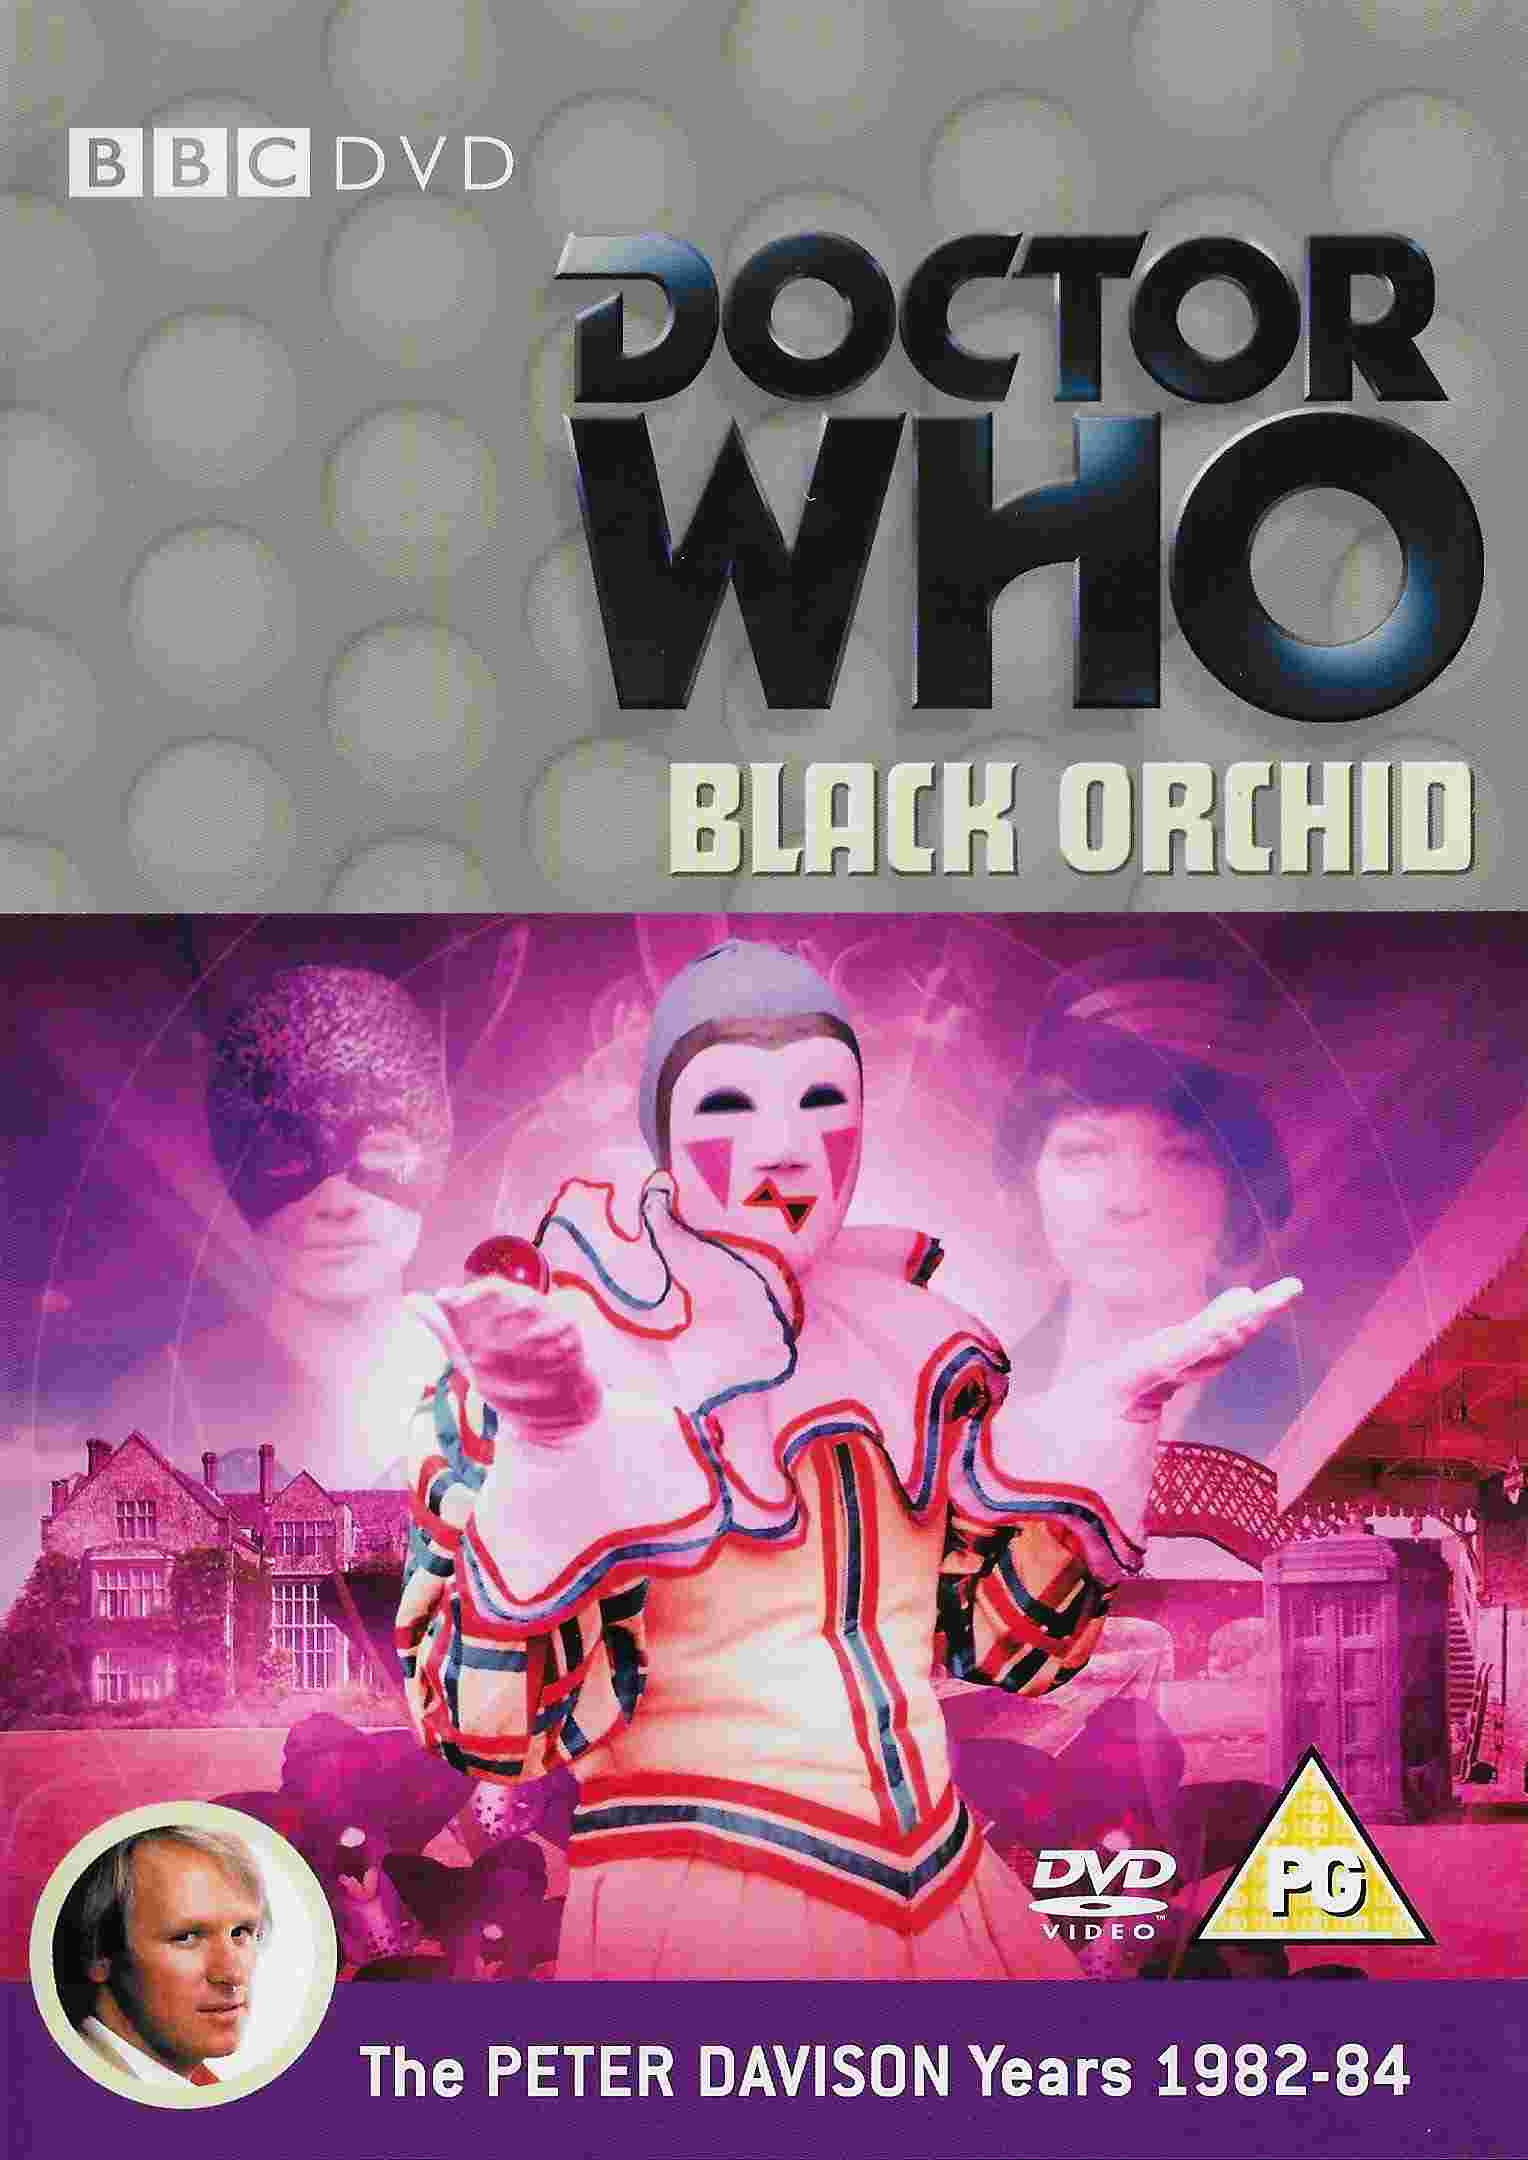 Picture of BBCDVD 2432 Doctor Who - Black Orchid by artist Terence Dudley from the BBC records and Tapes library